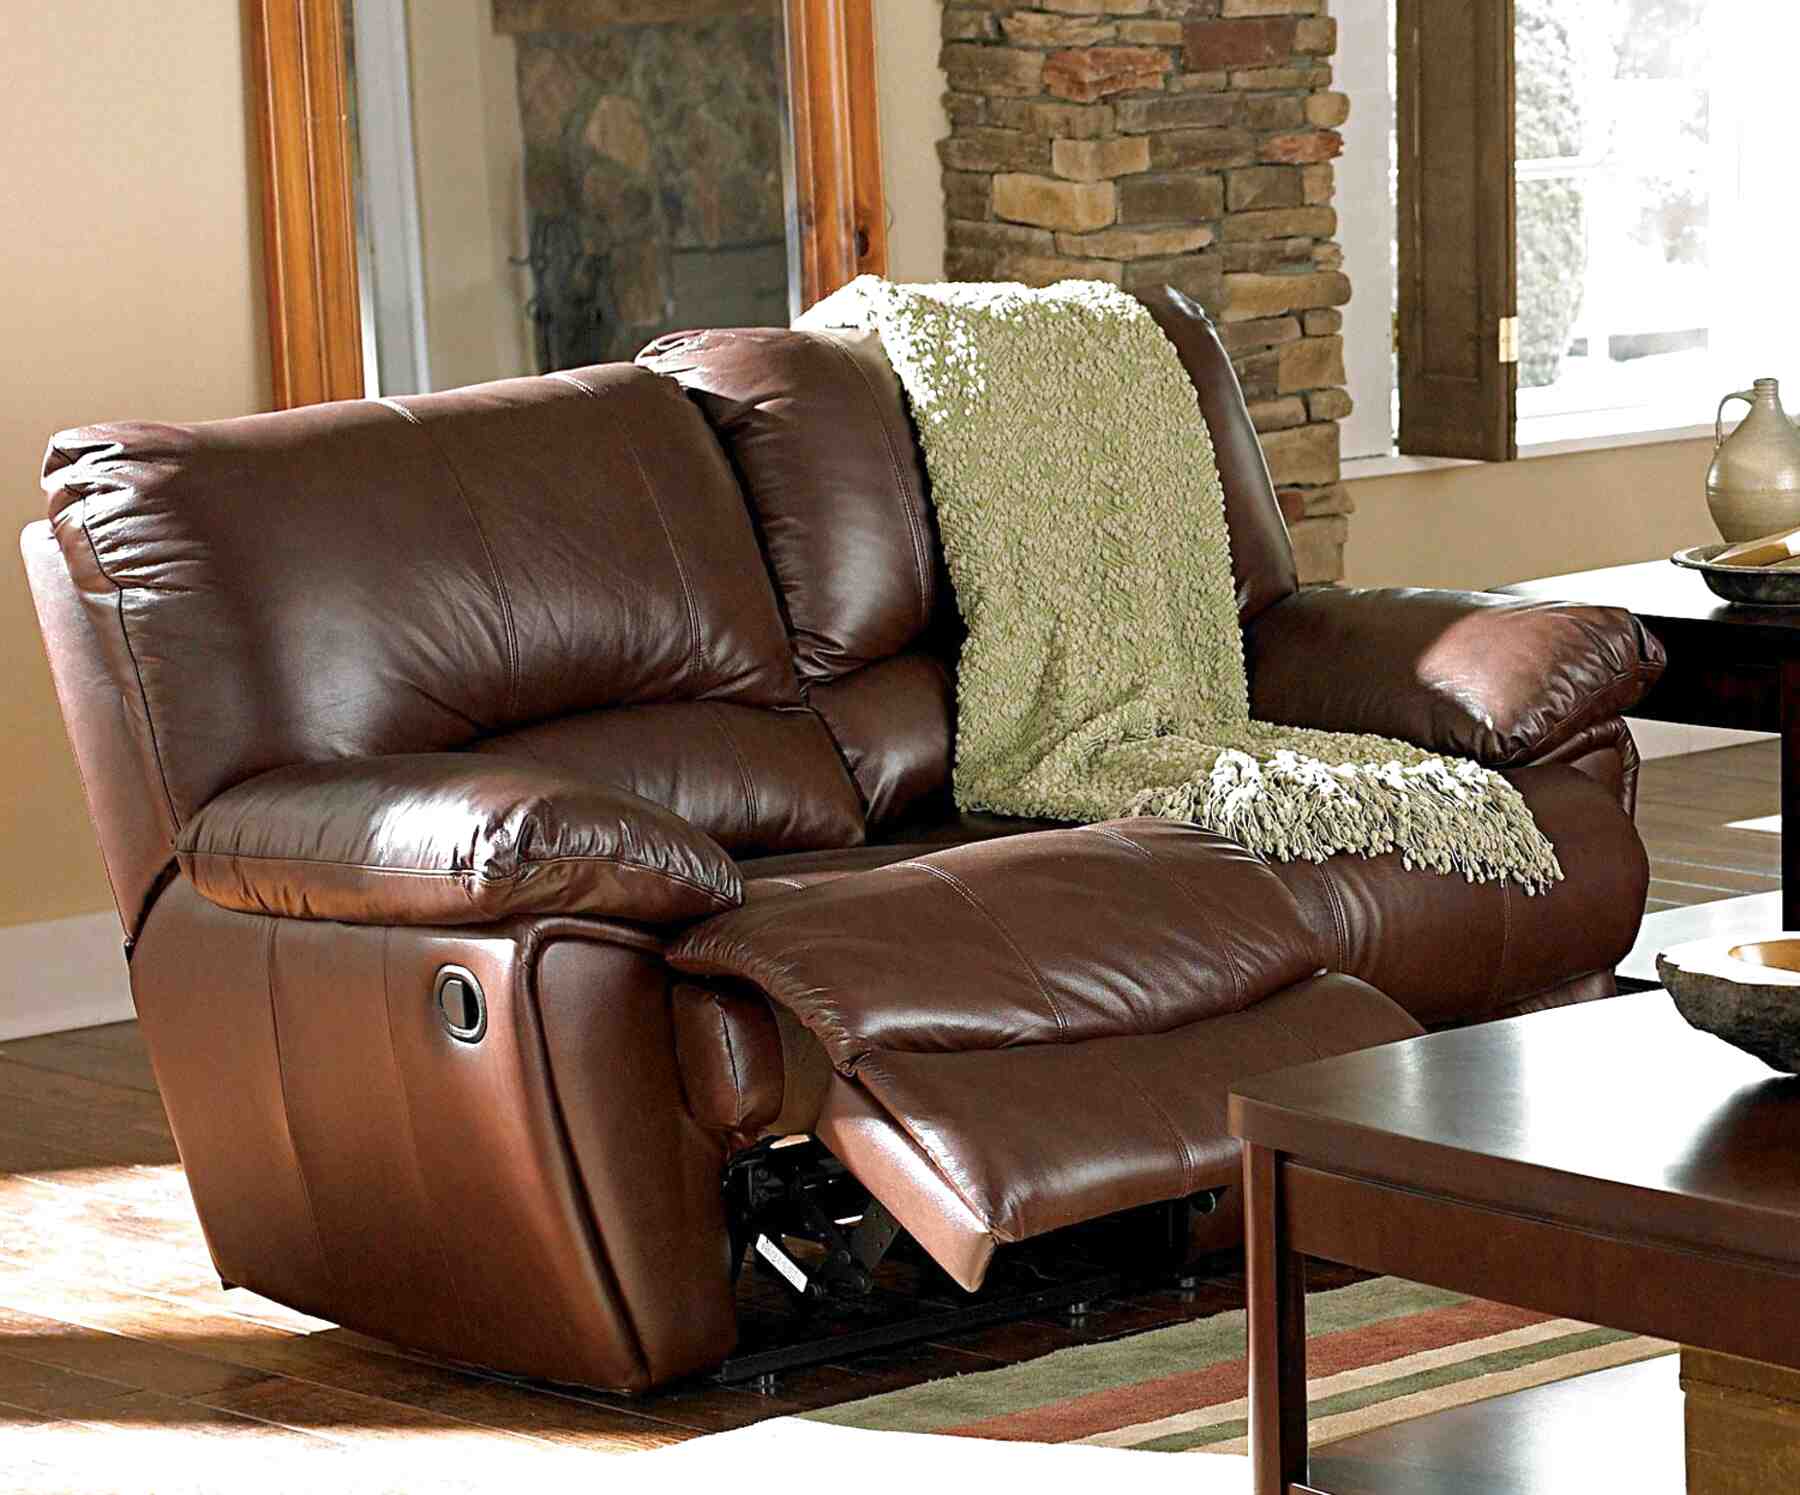 236 Leather%2Brecliner%2Bsofas%2Bx2 